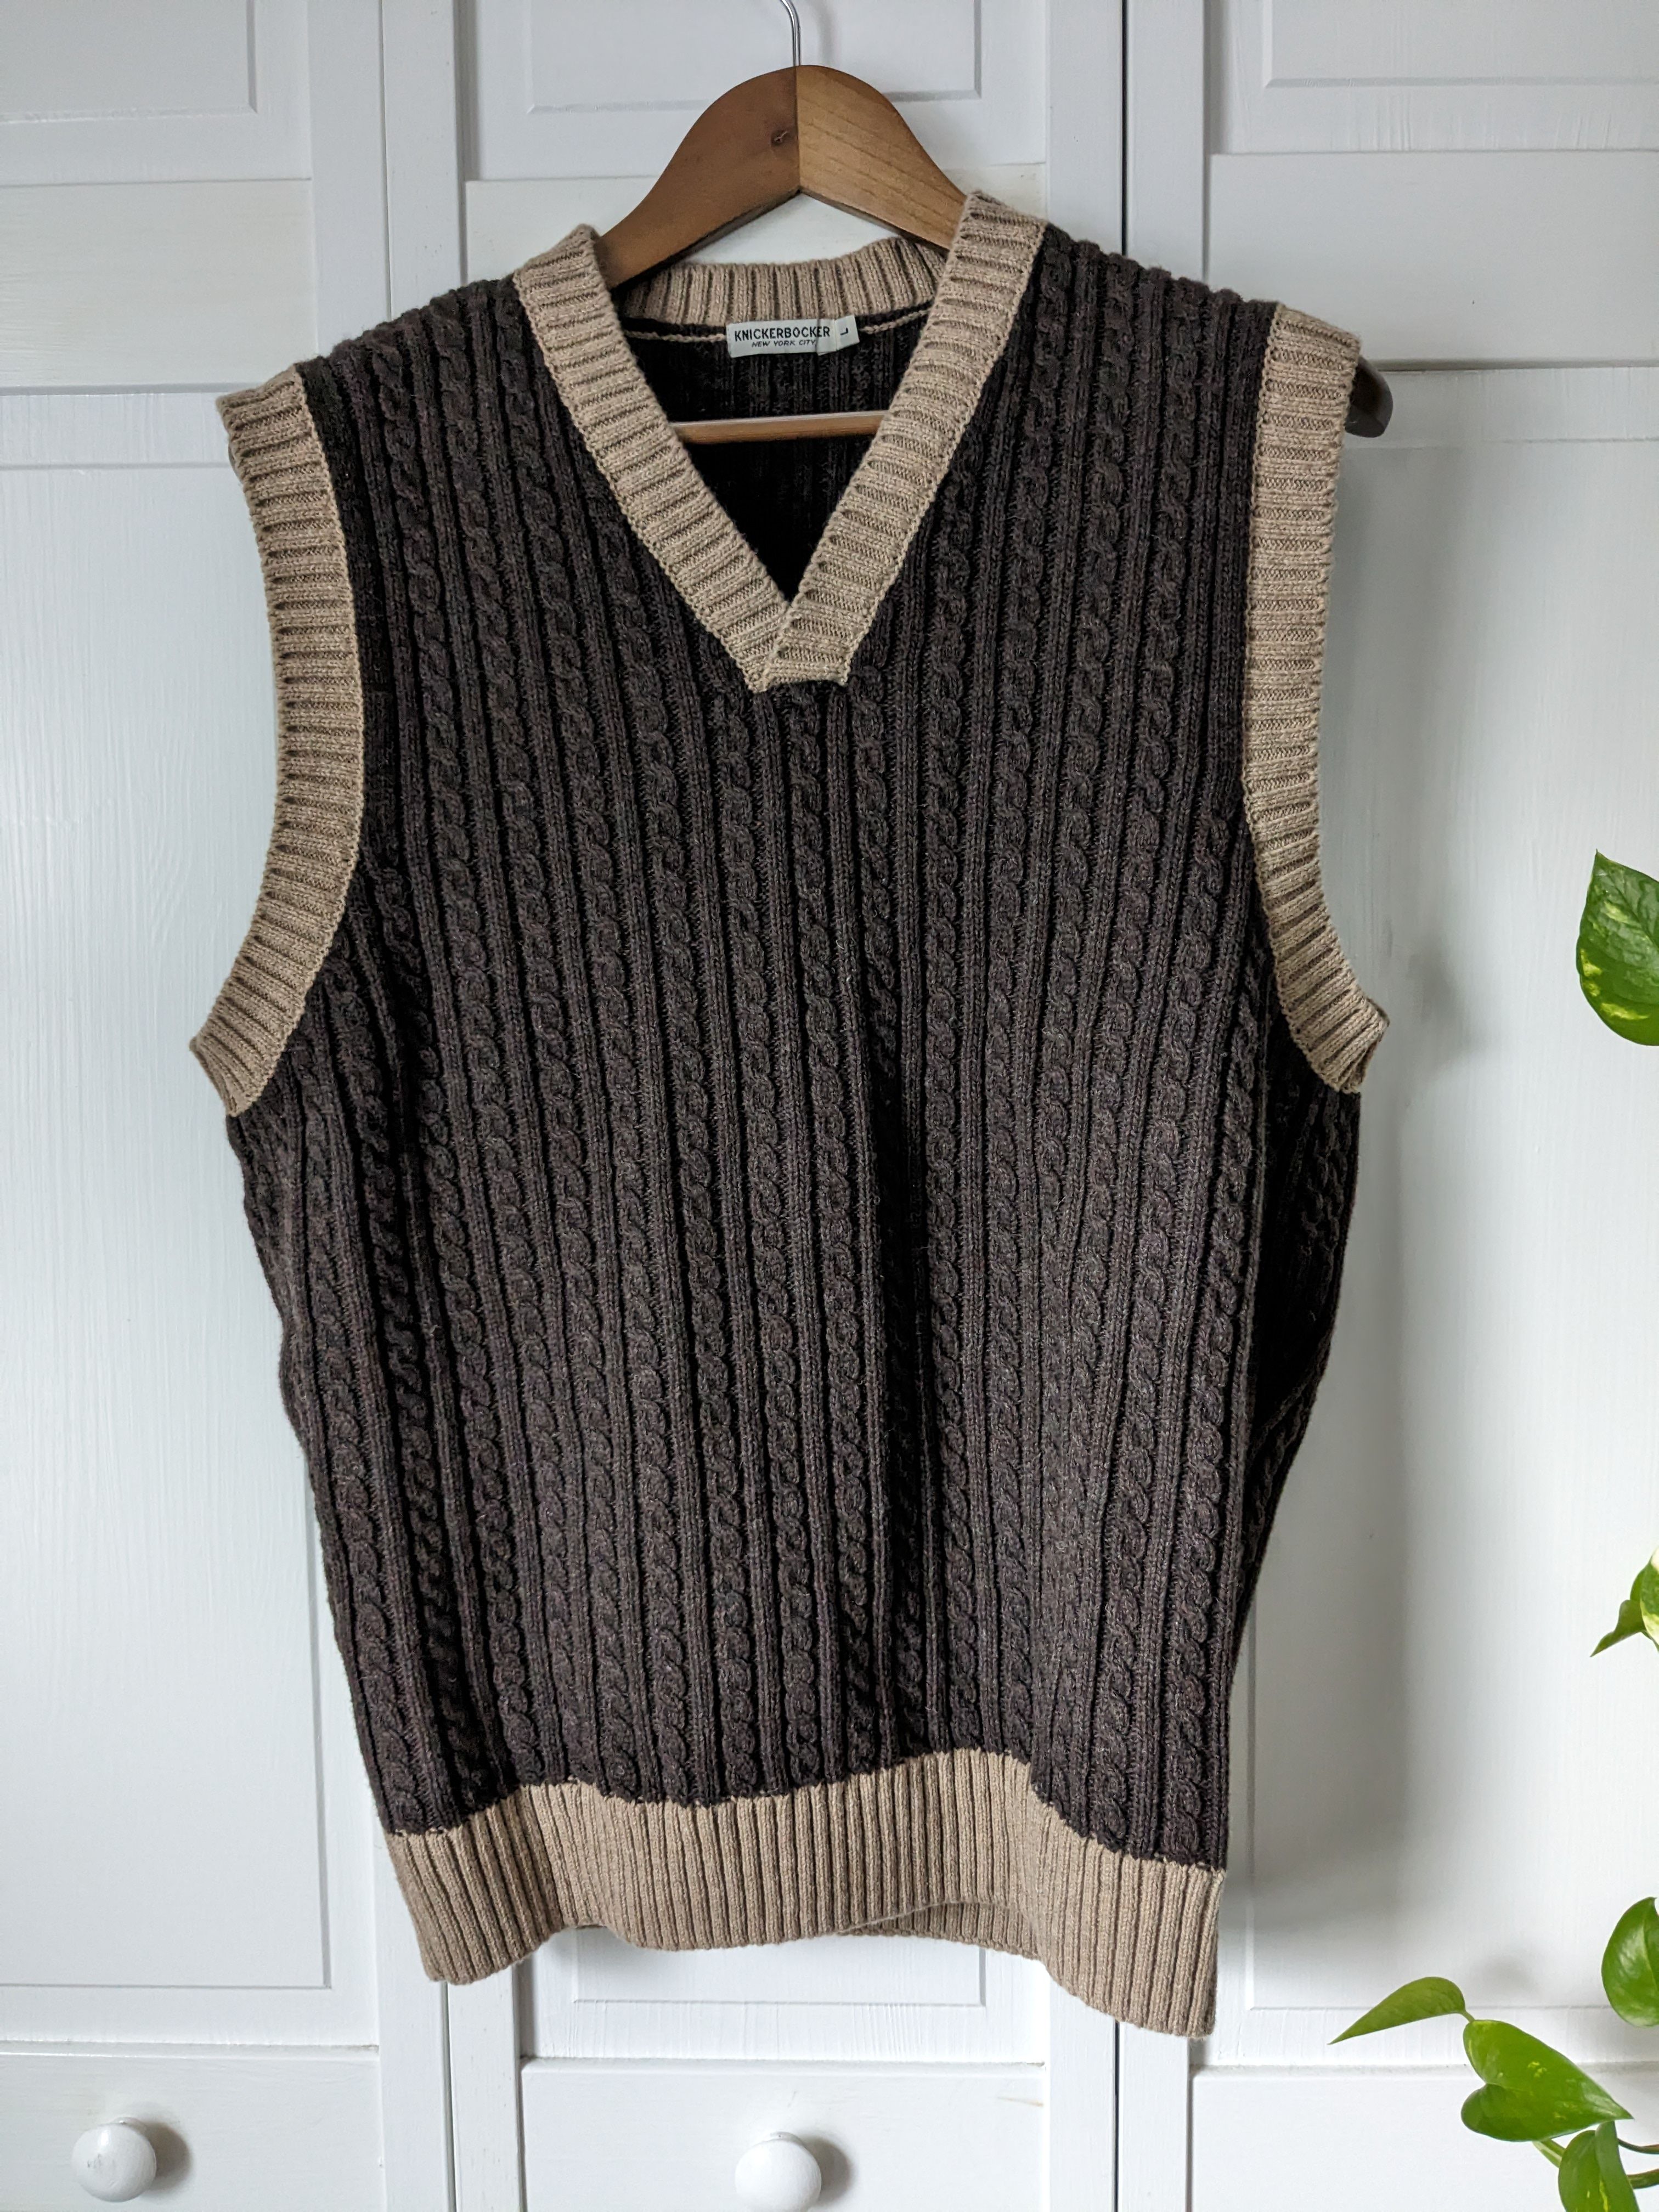 Knickerbocker Mfg Co Wool blend cable knit sweater vest Size US L / EU 52-54 / 3 - 1 Preview